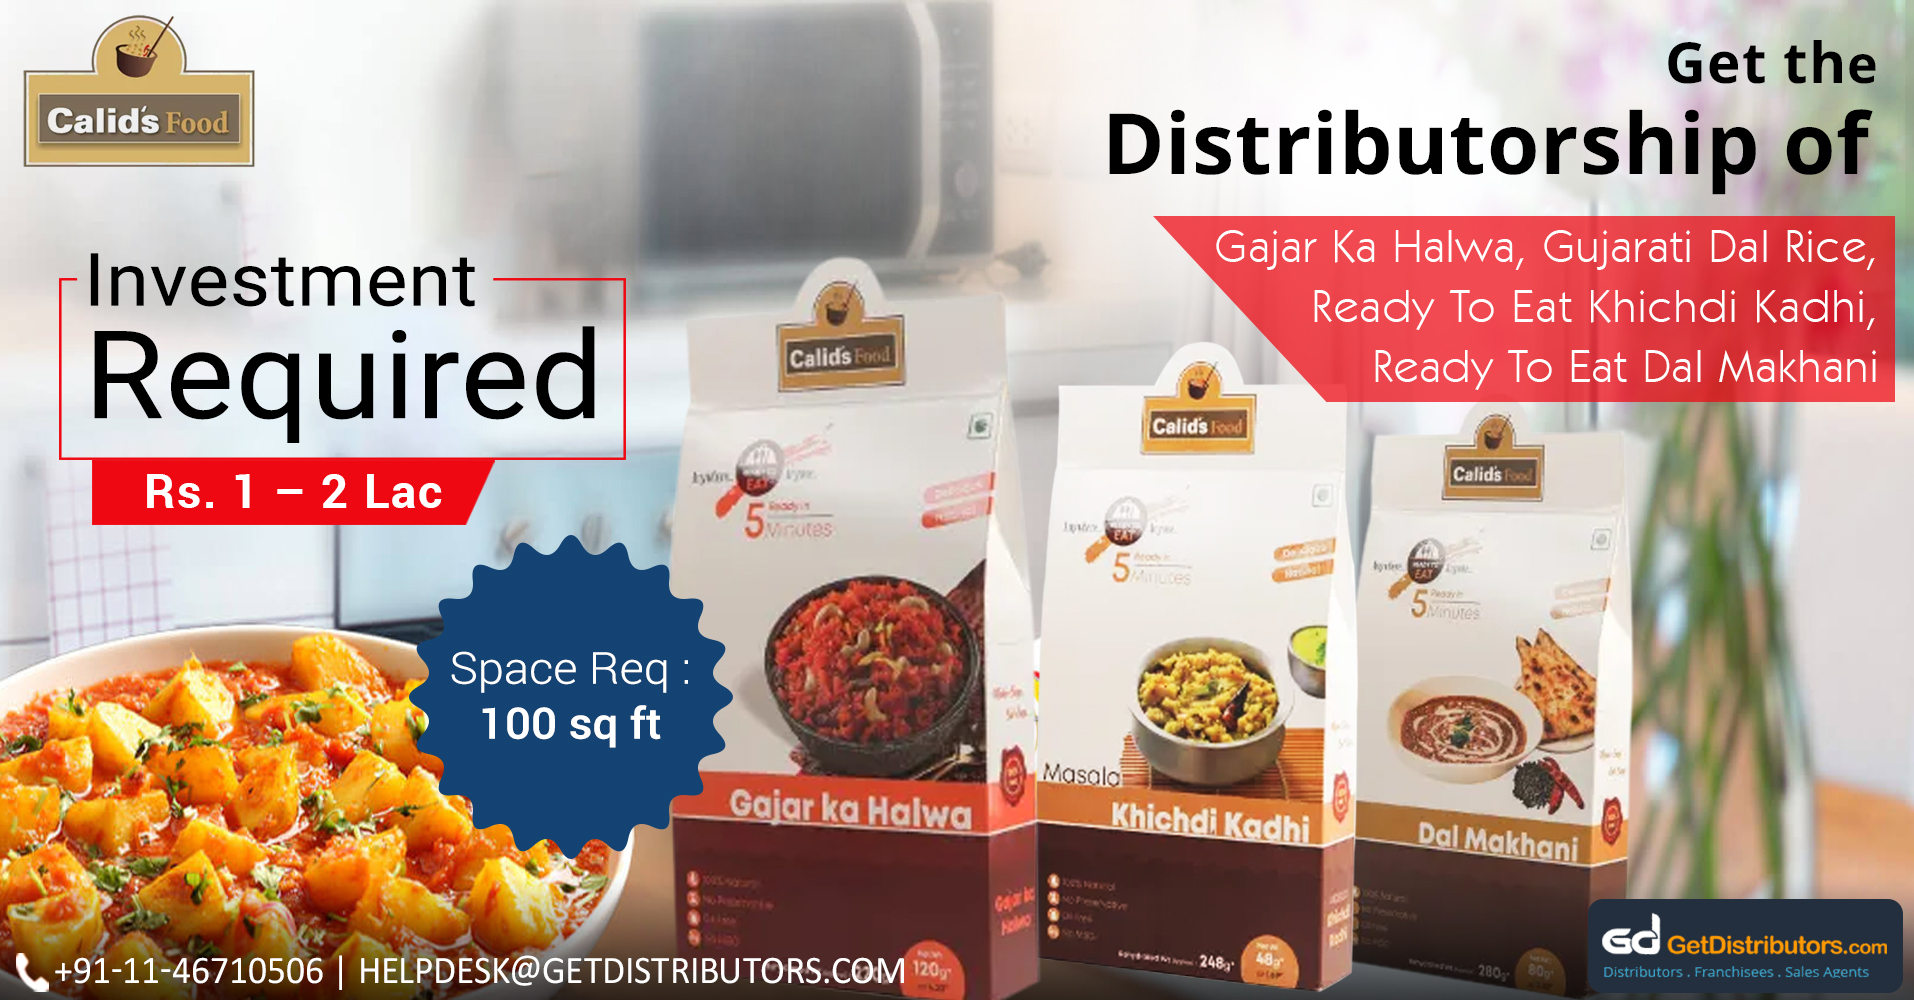 Presenting Our Premium Grade Range Of Ready To Eat Food Products: Calid Food Private Limited